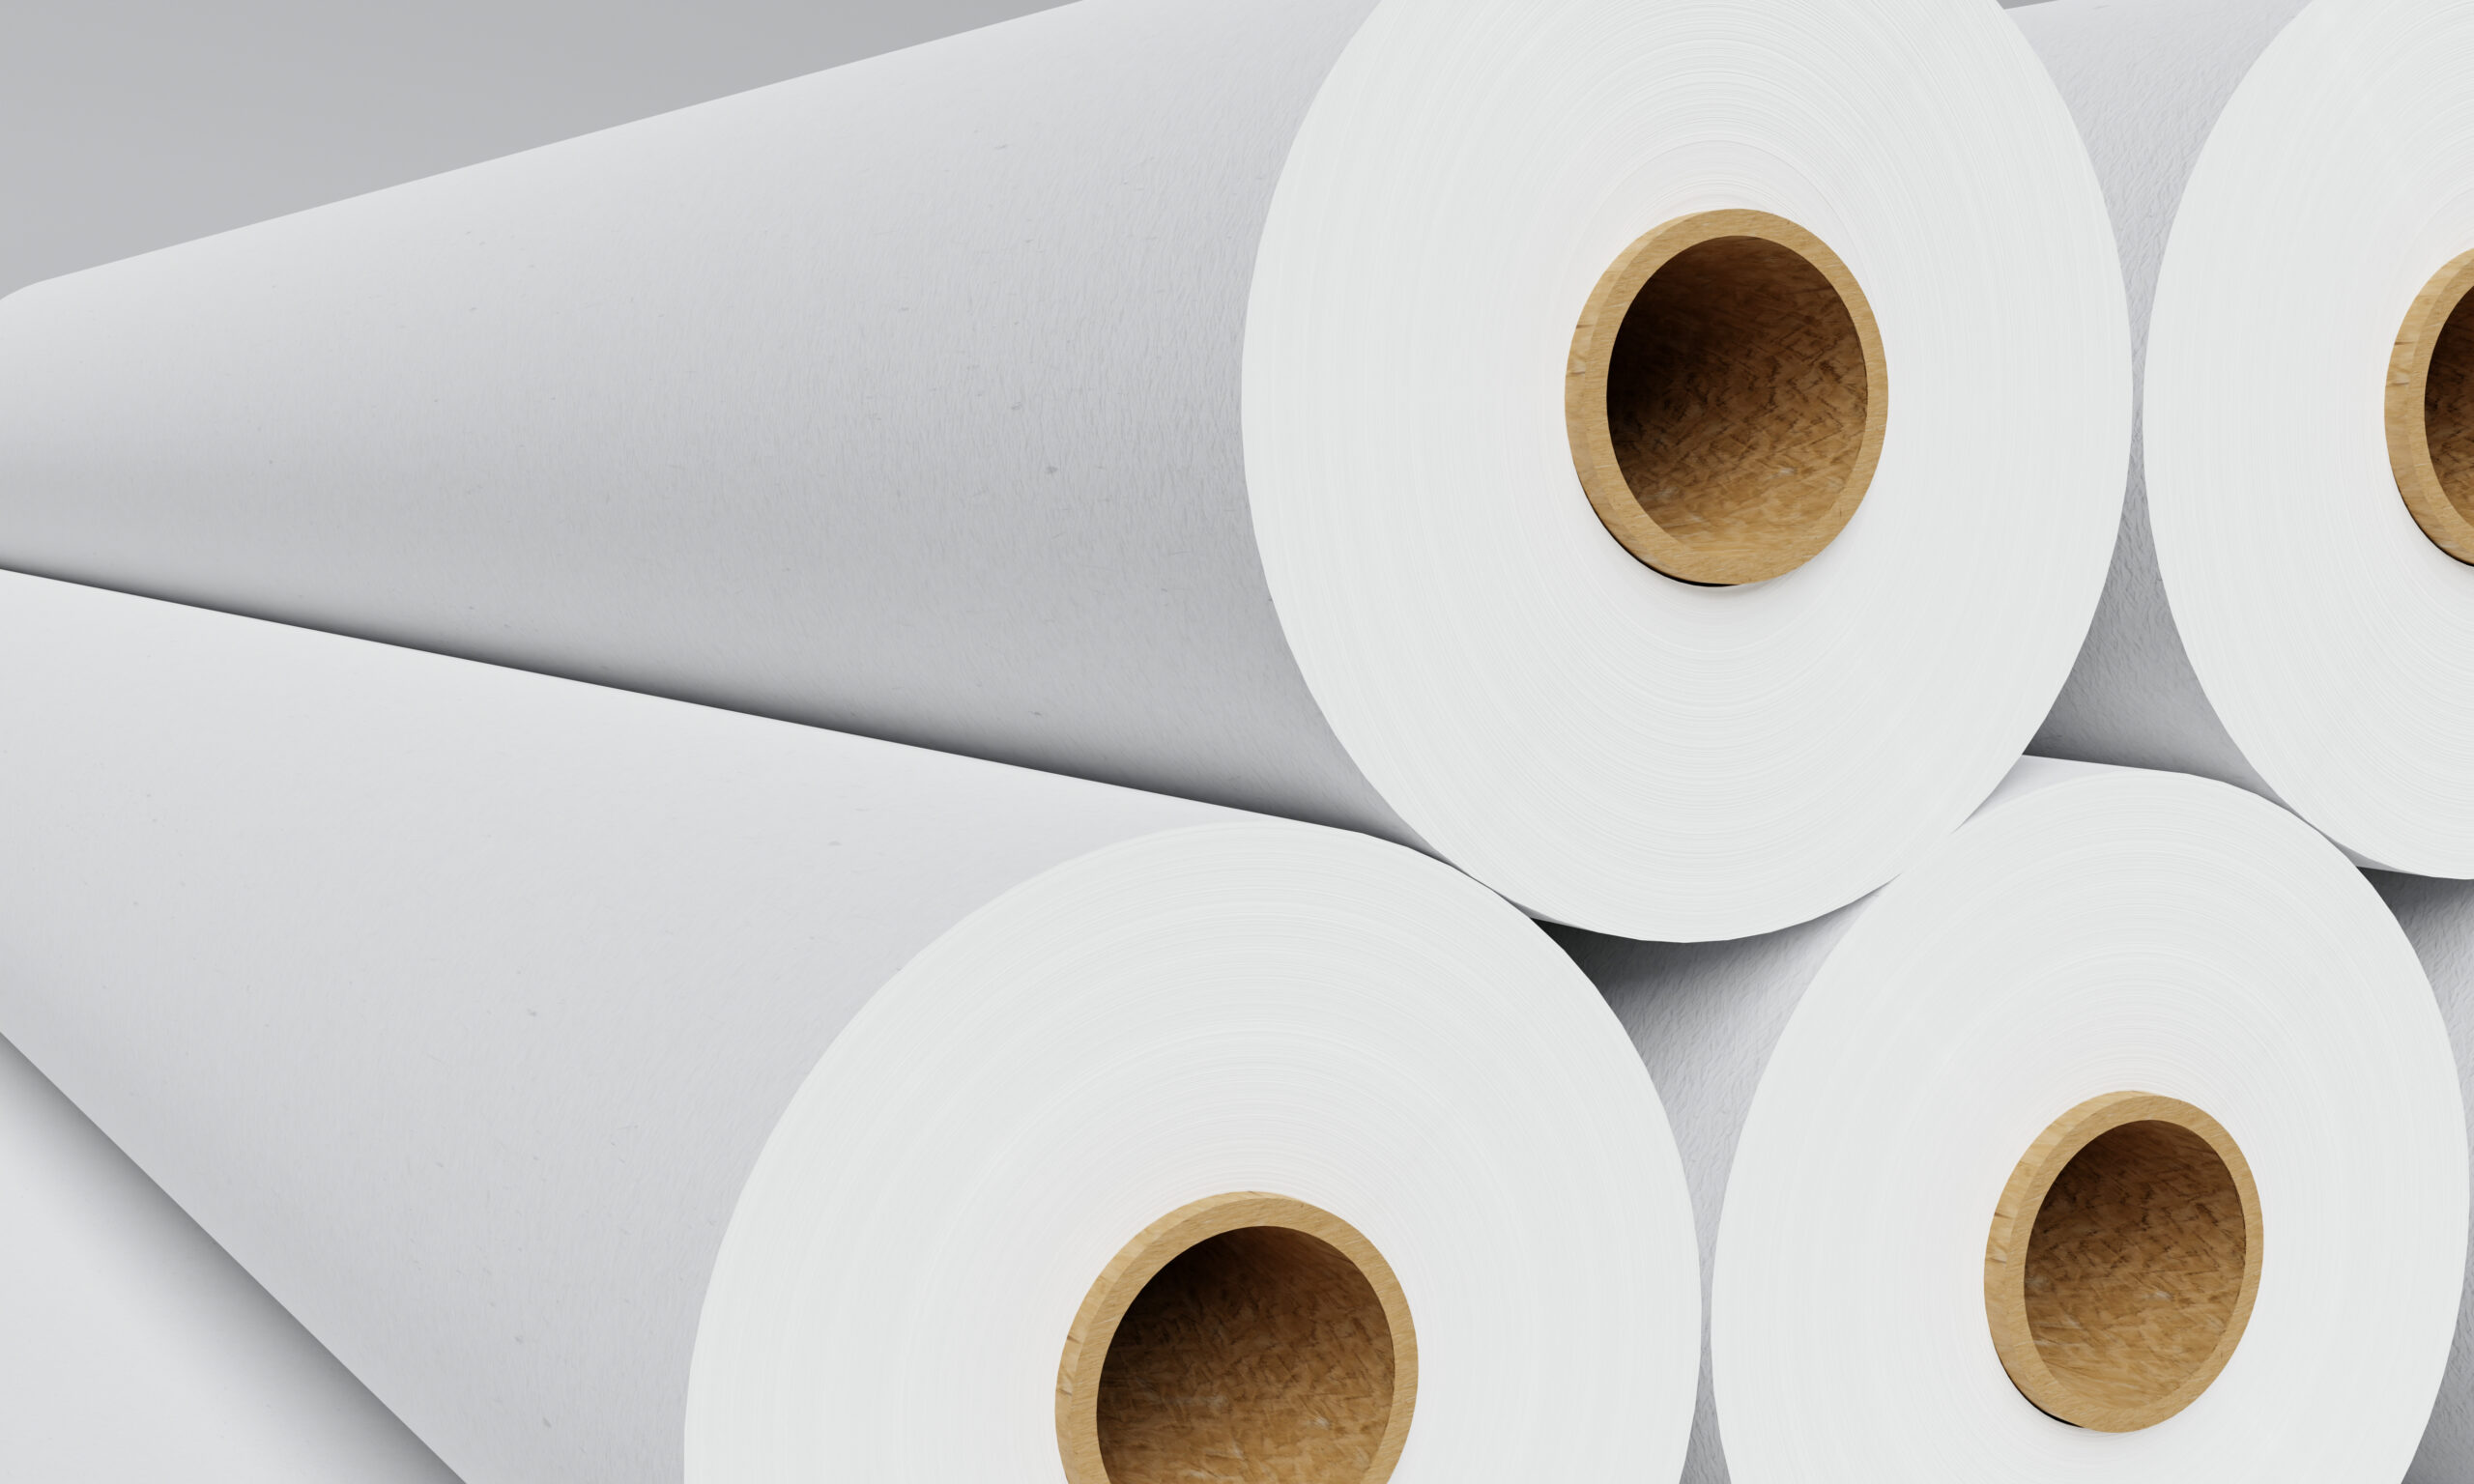 Group of white paper rolls in industrial factory for storage background. Production and manufacturing concept. 3D illustration rendering